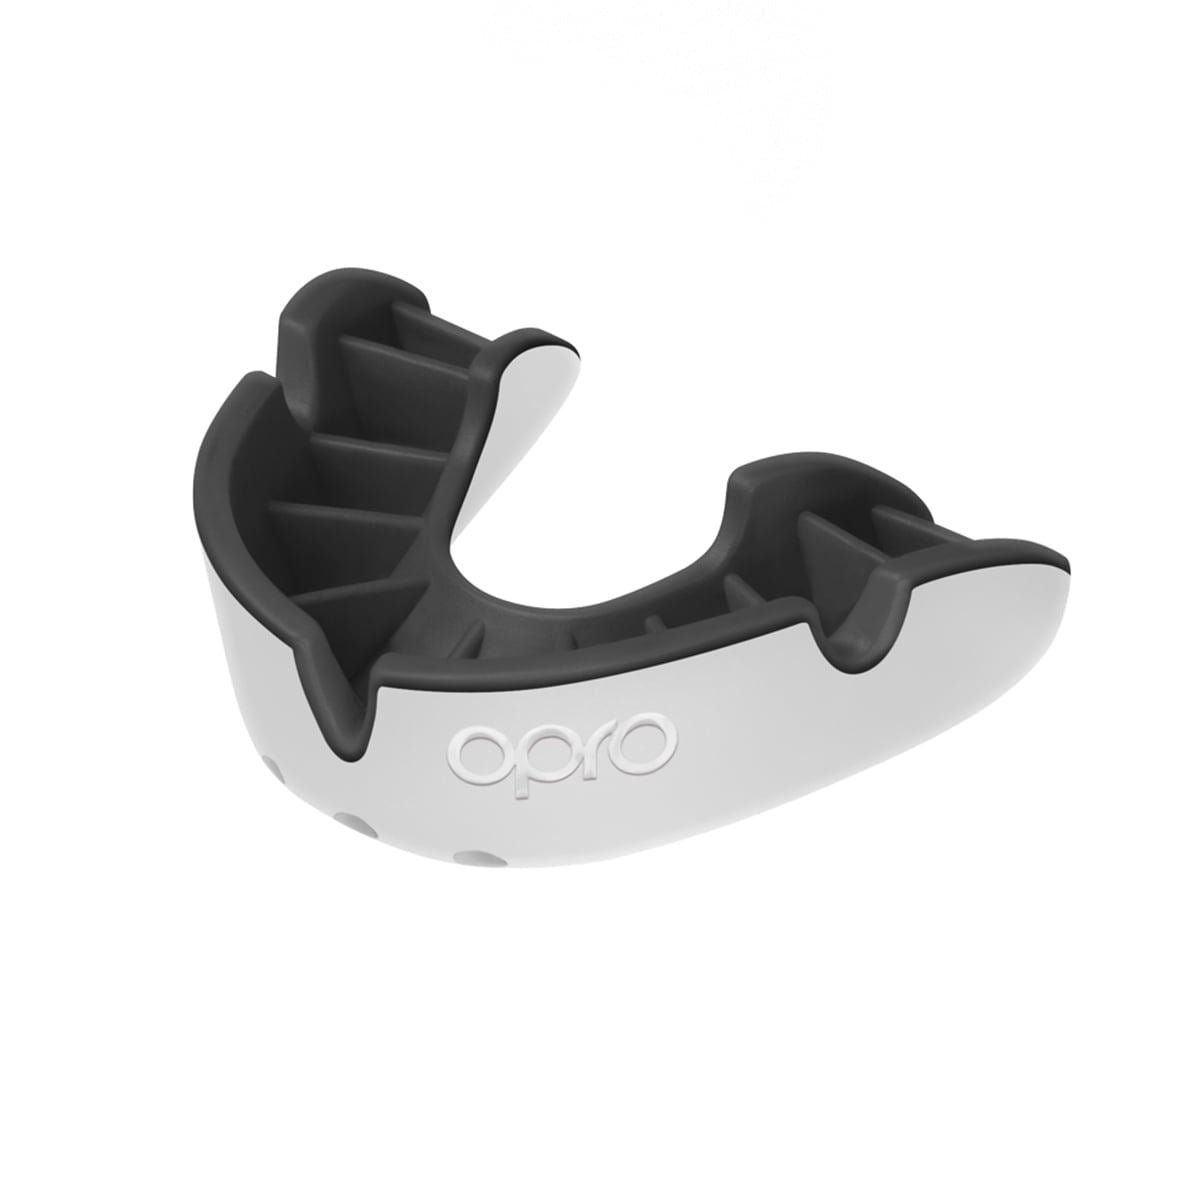 Men's Rugby Protective Mouthguard OPRO Self-Fit Silver 2022 White/Black